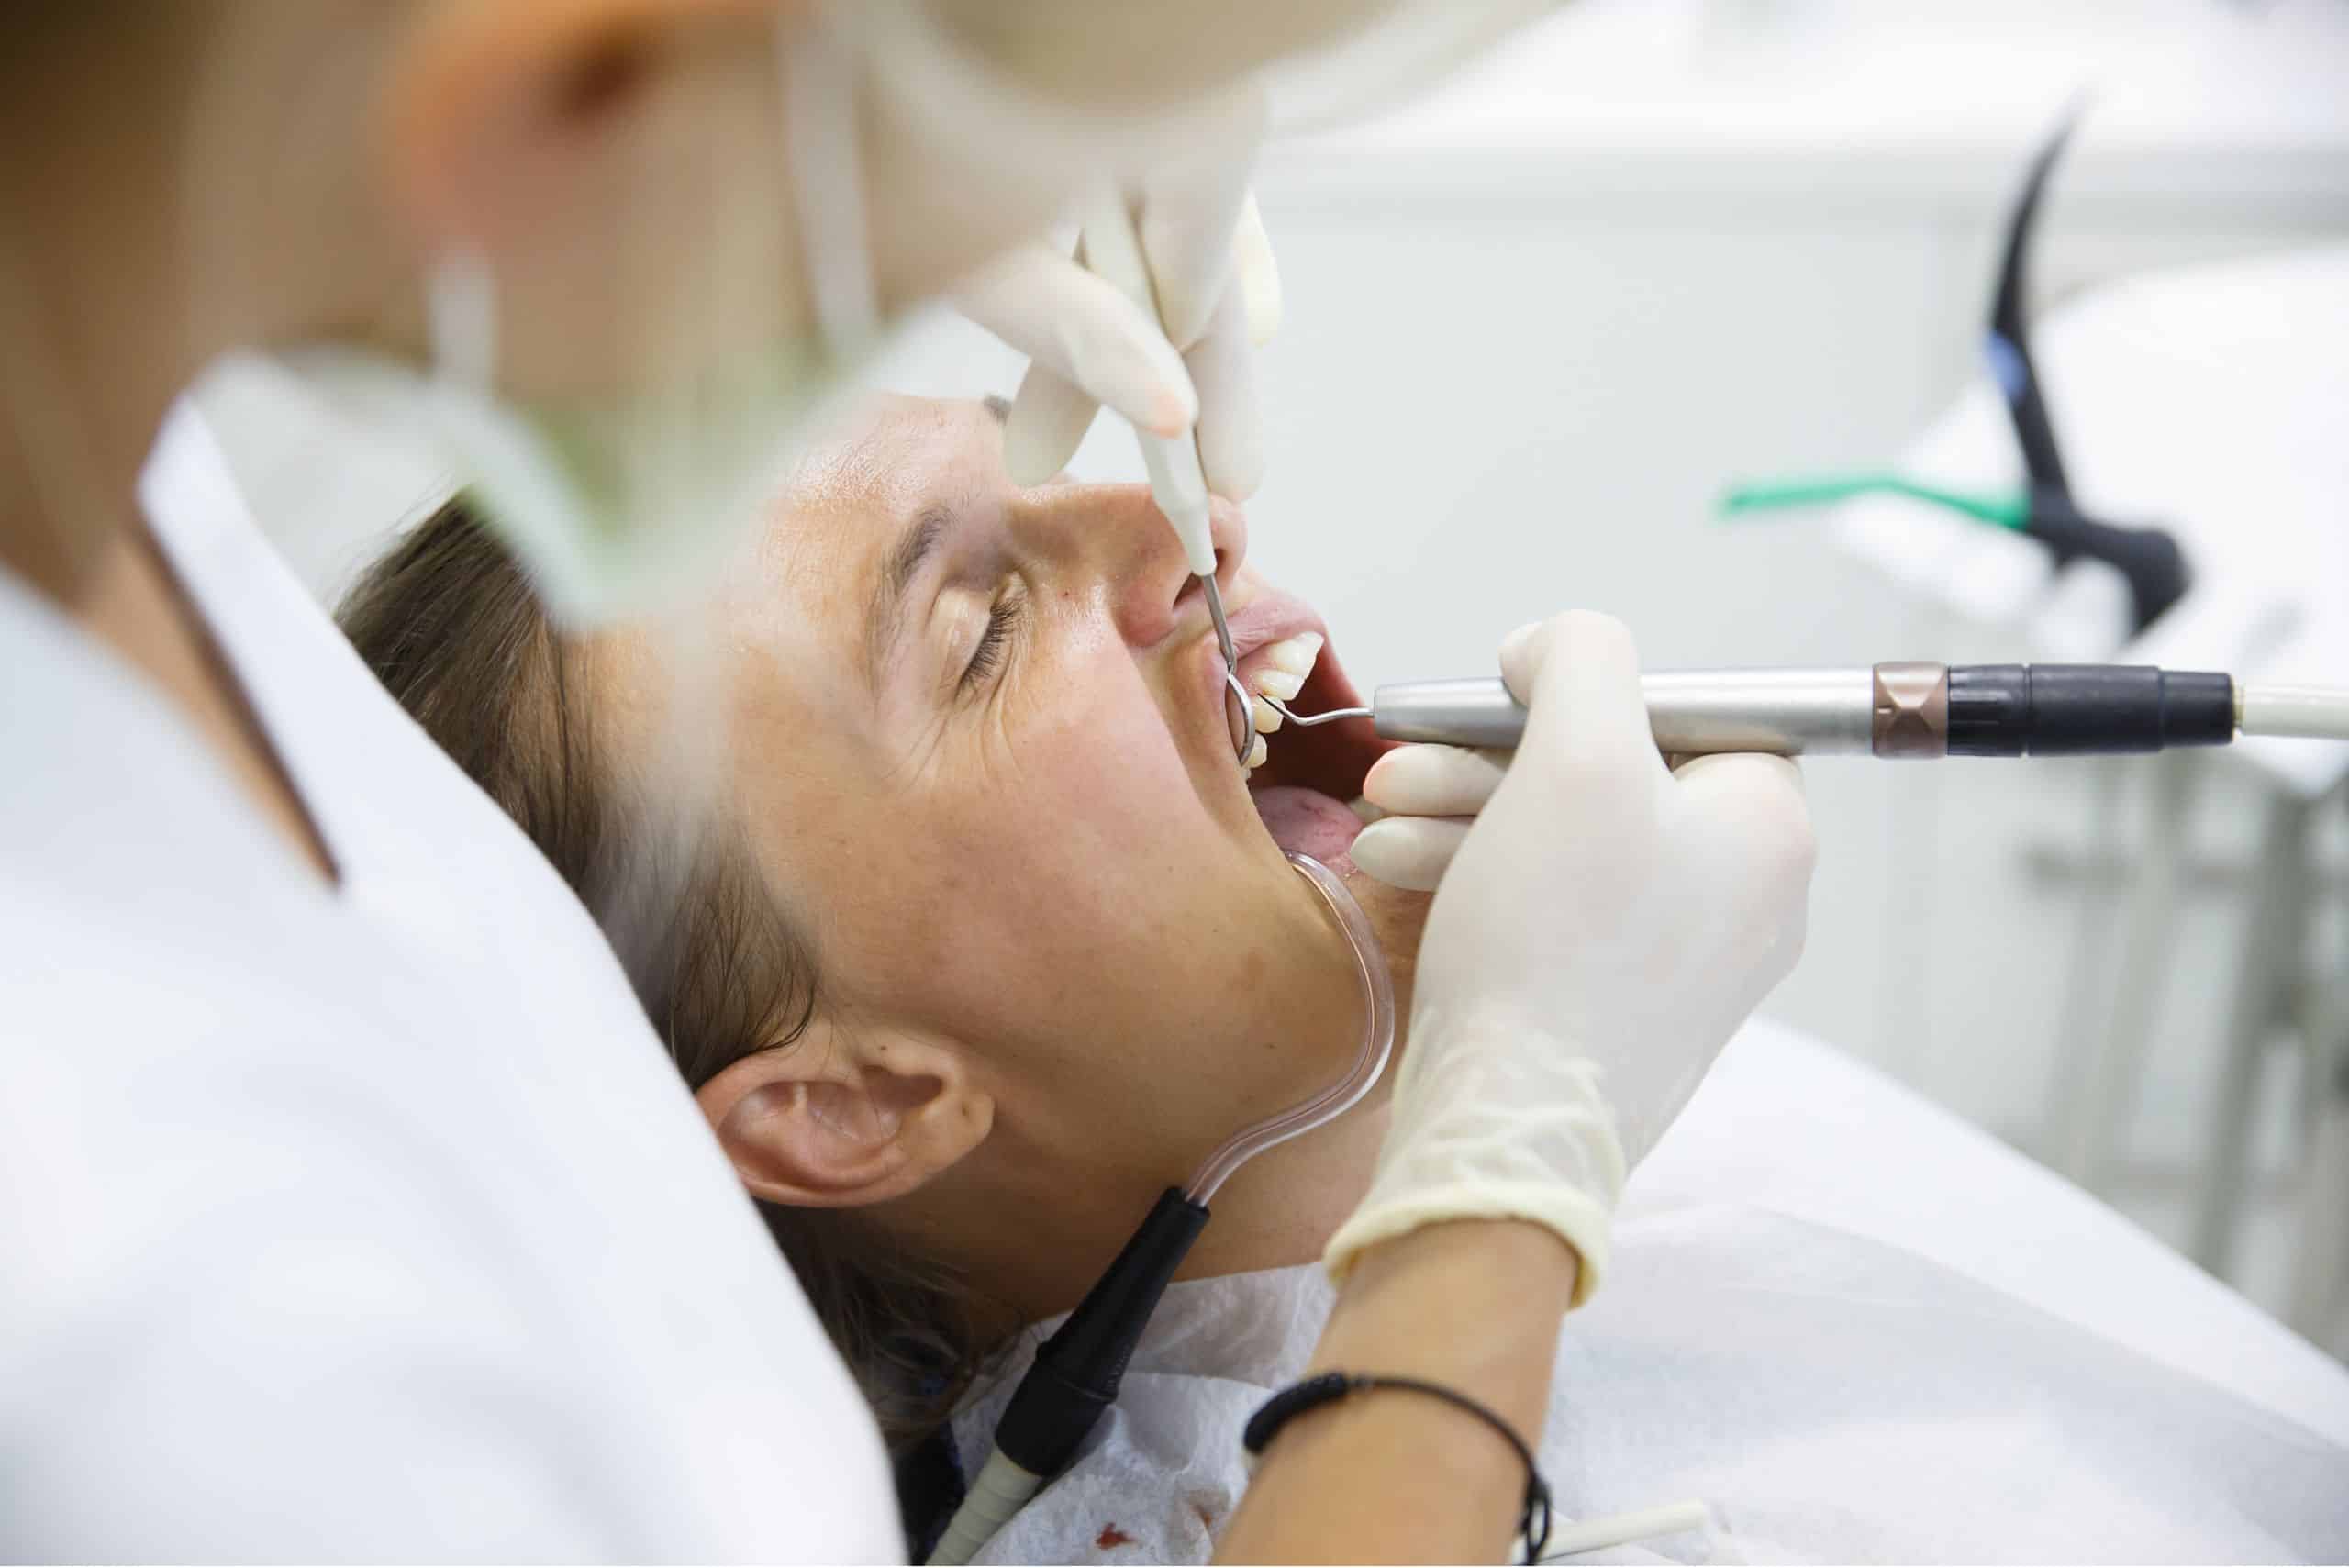 Individual undergoing dental care and various dental procedures at a dental clinic